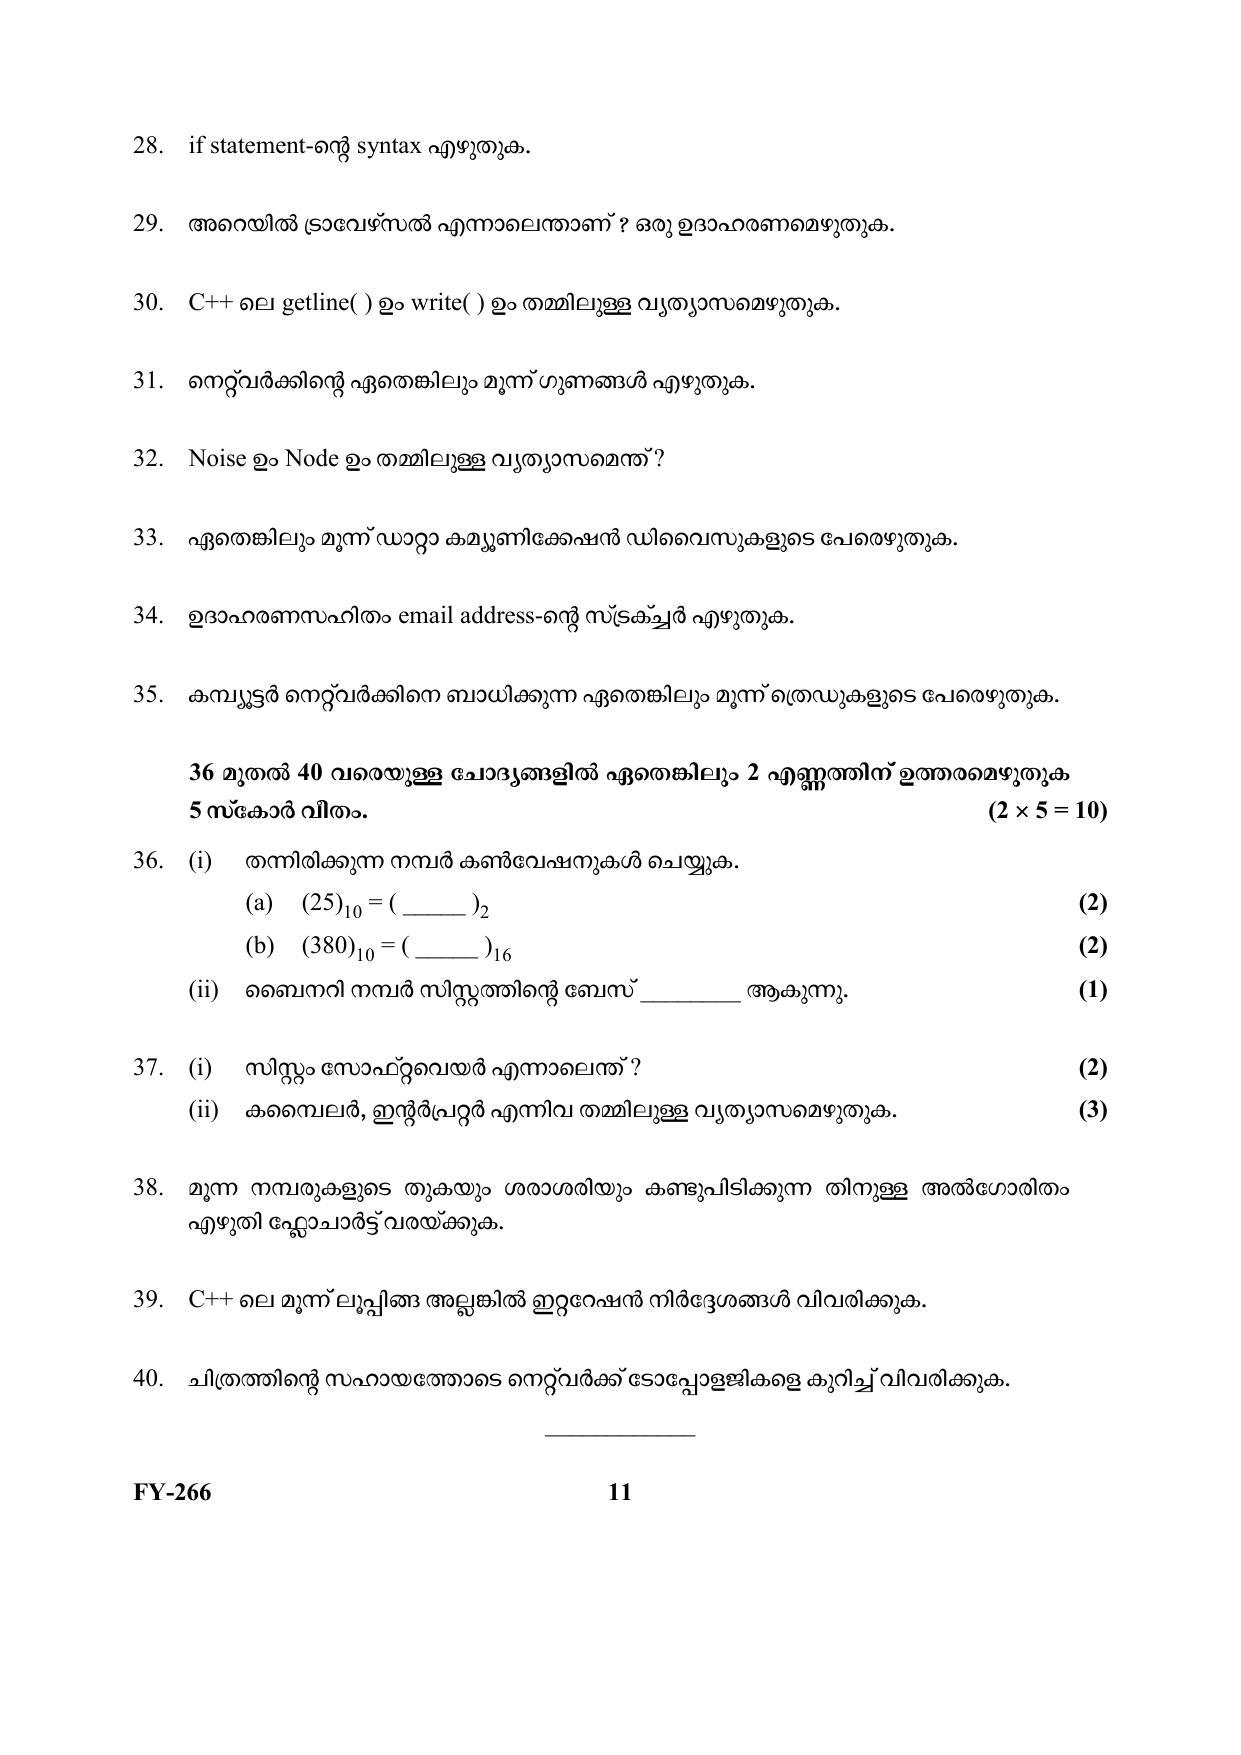 Kerala Plus One (Class 11th) Computer Science (Hearing Impaired) Question Paper 2021 - Page 11